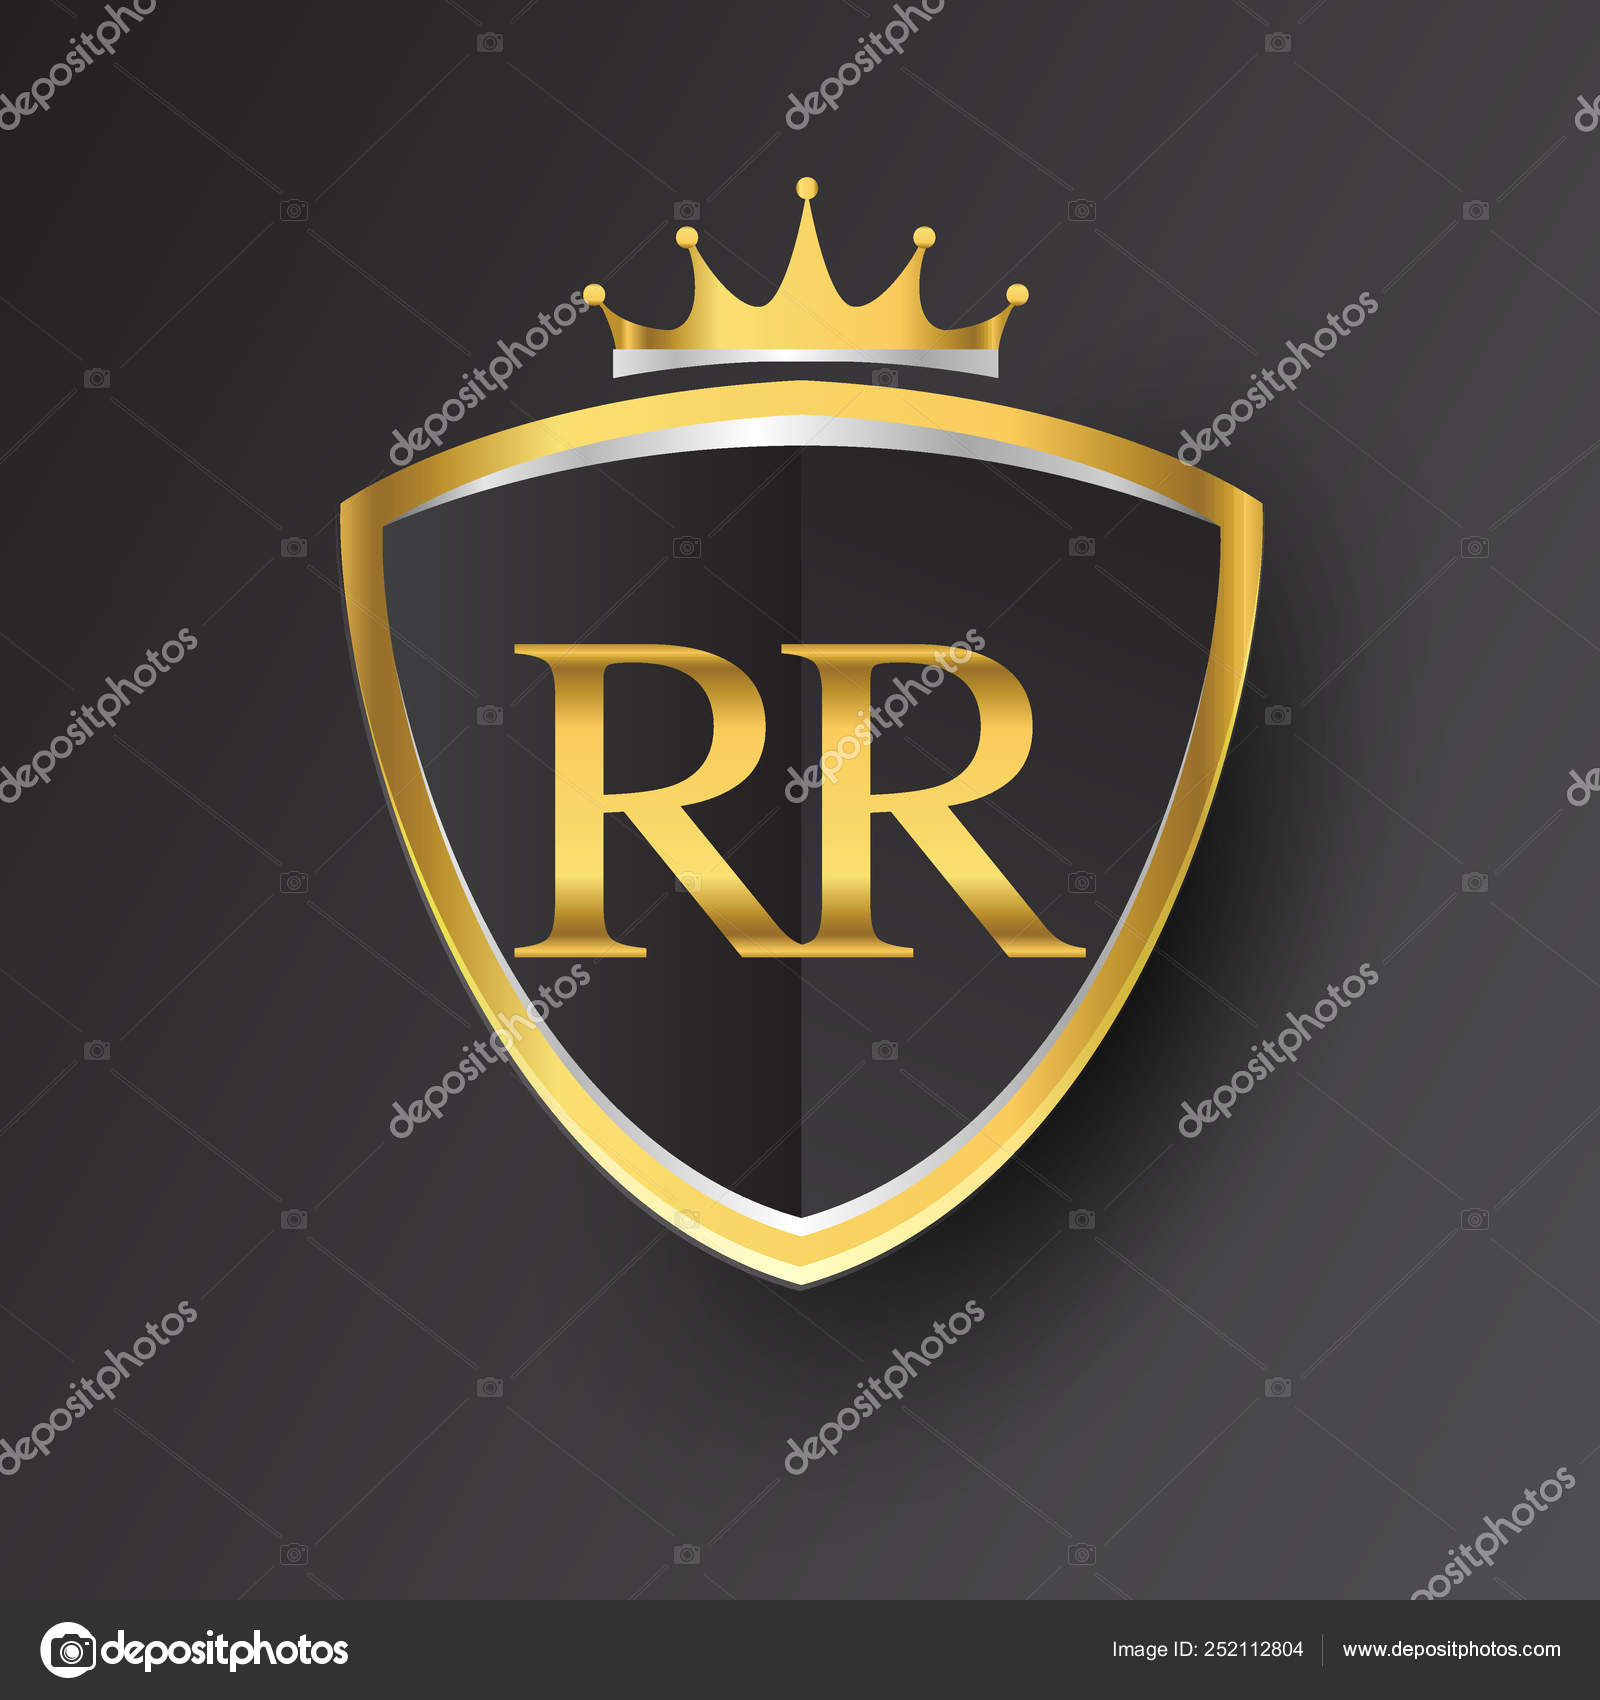 ᐈ R R Logo Stock Images Royalty Free Rr Vectors Download On Depositphotos